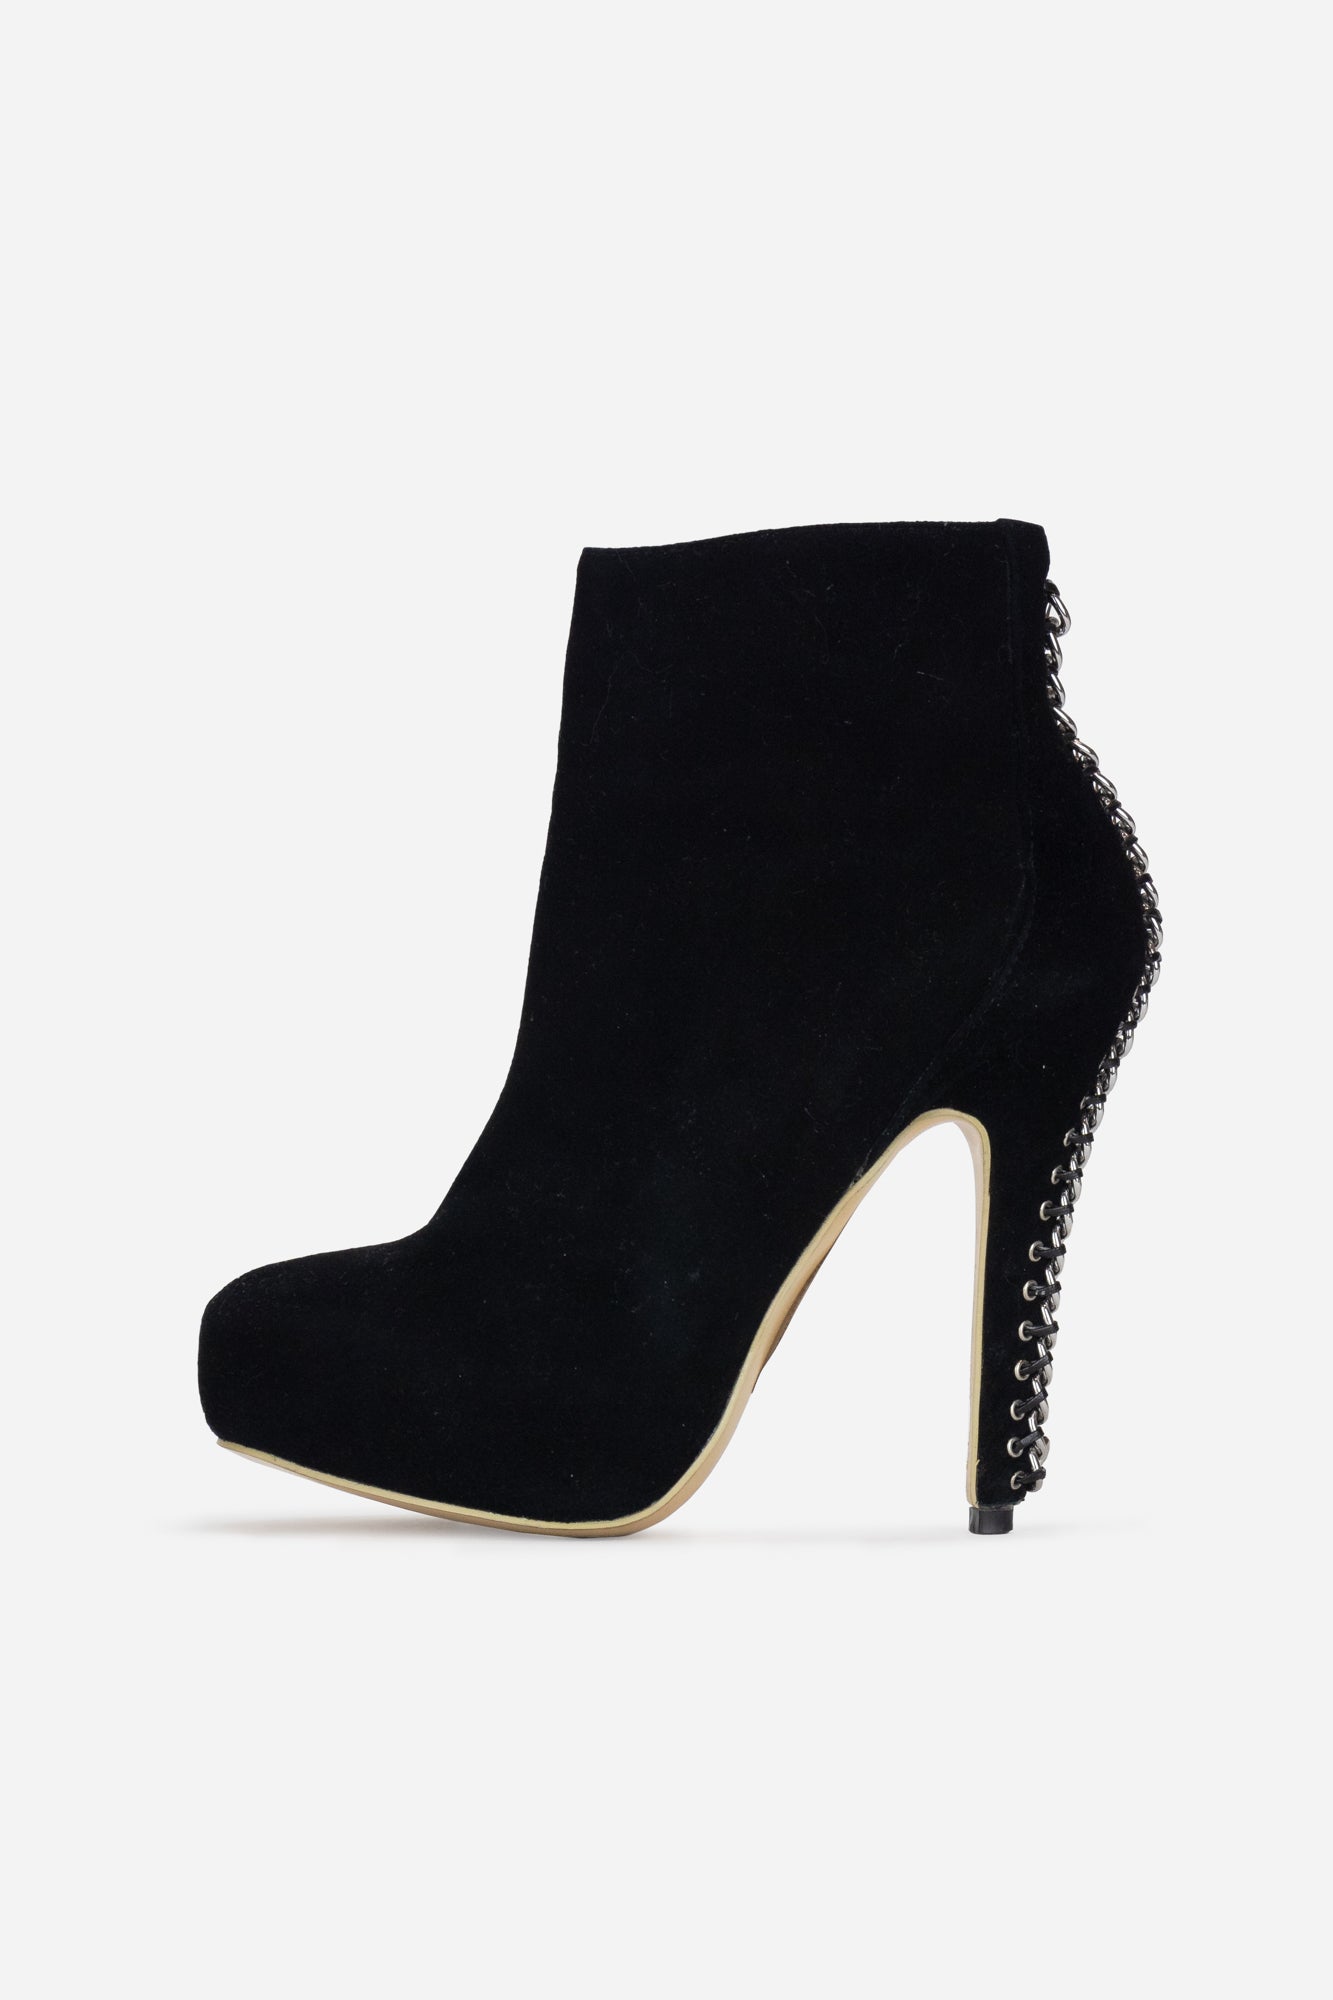 black booties with silver laced heel detail